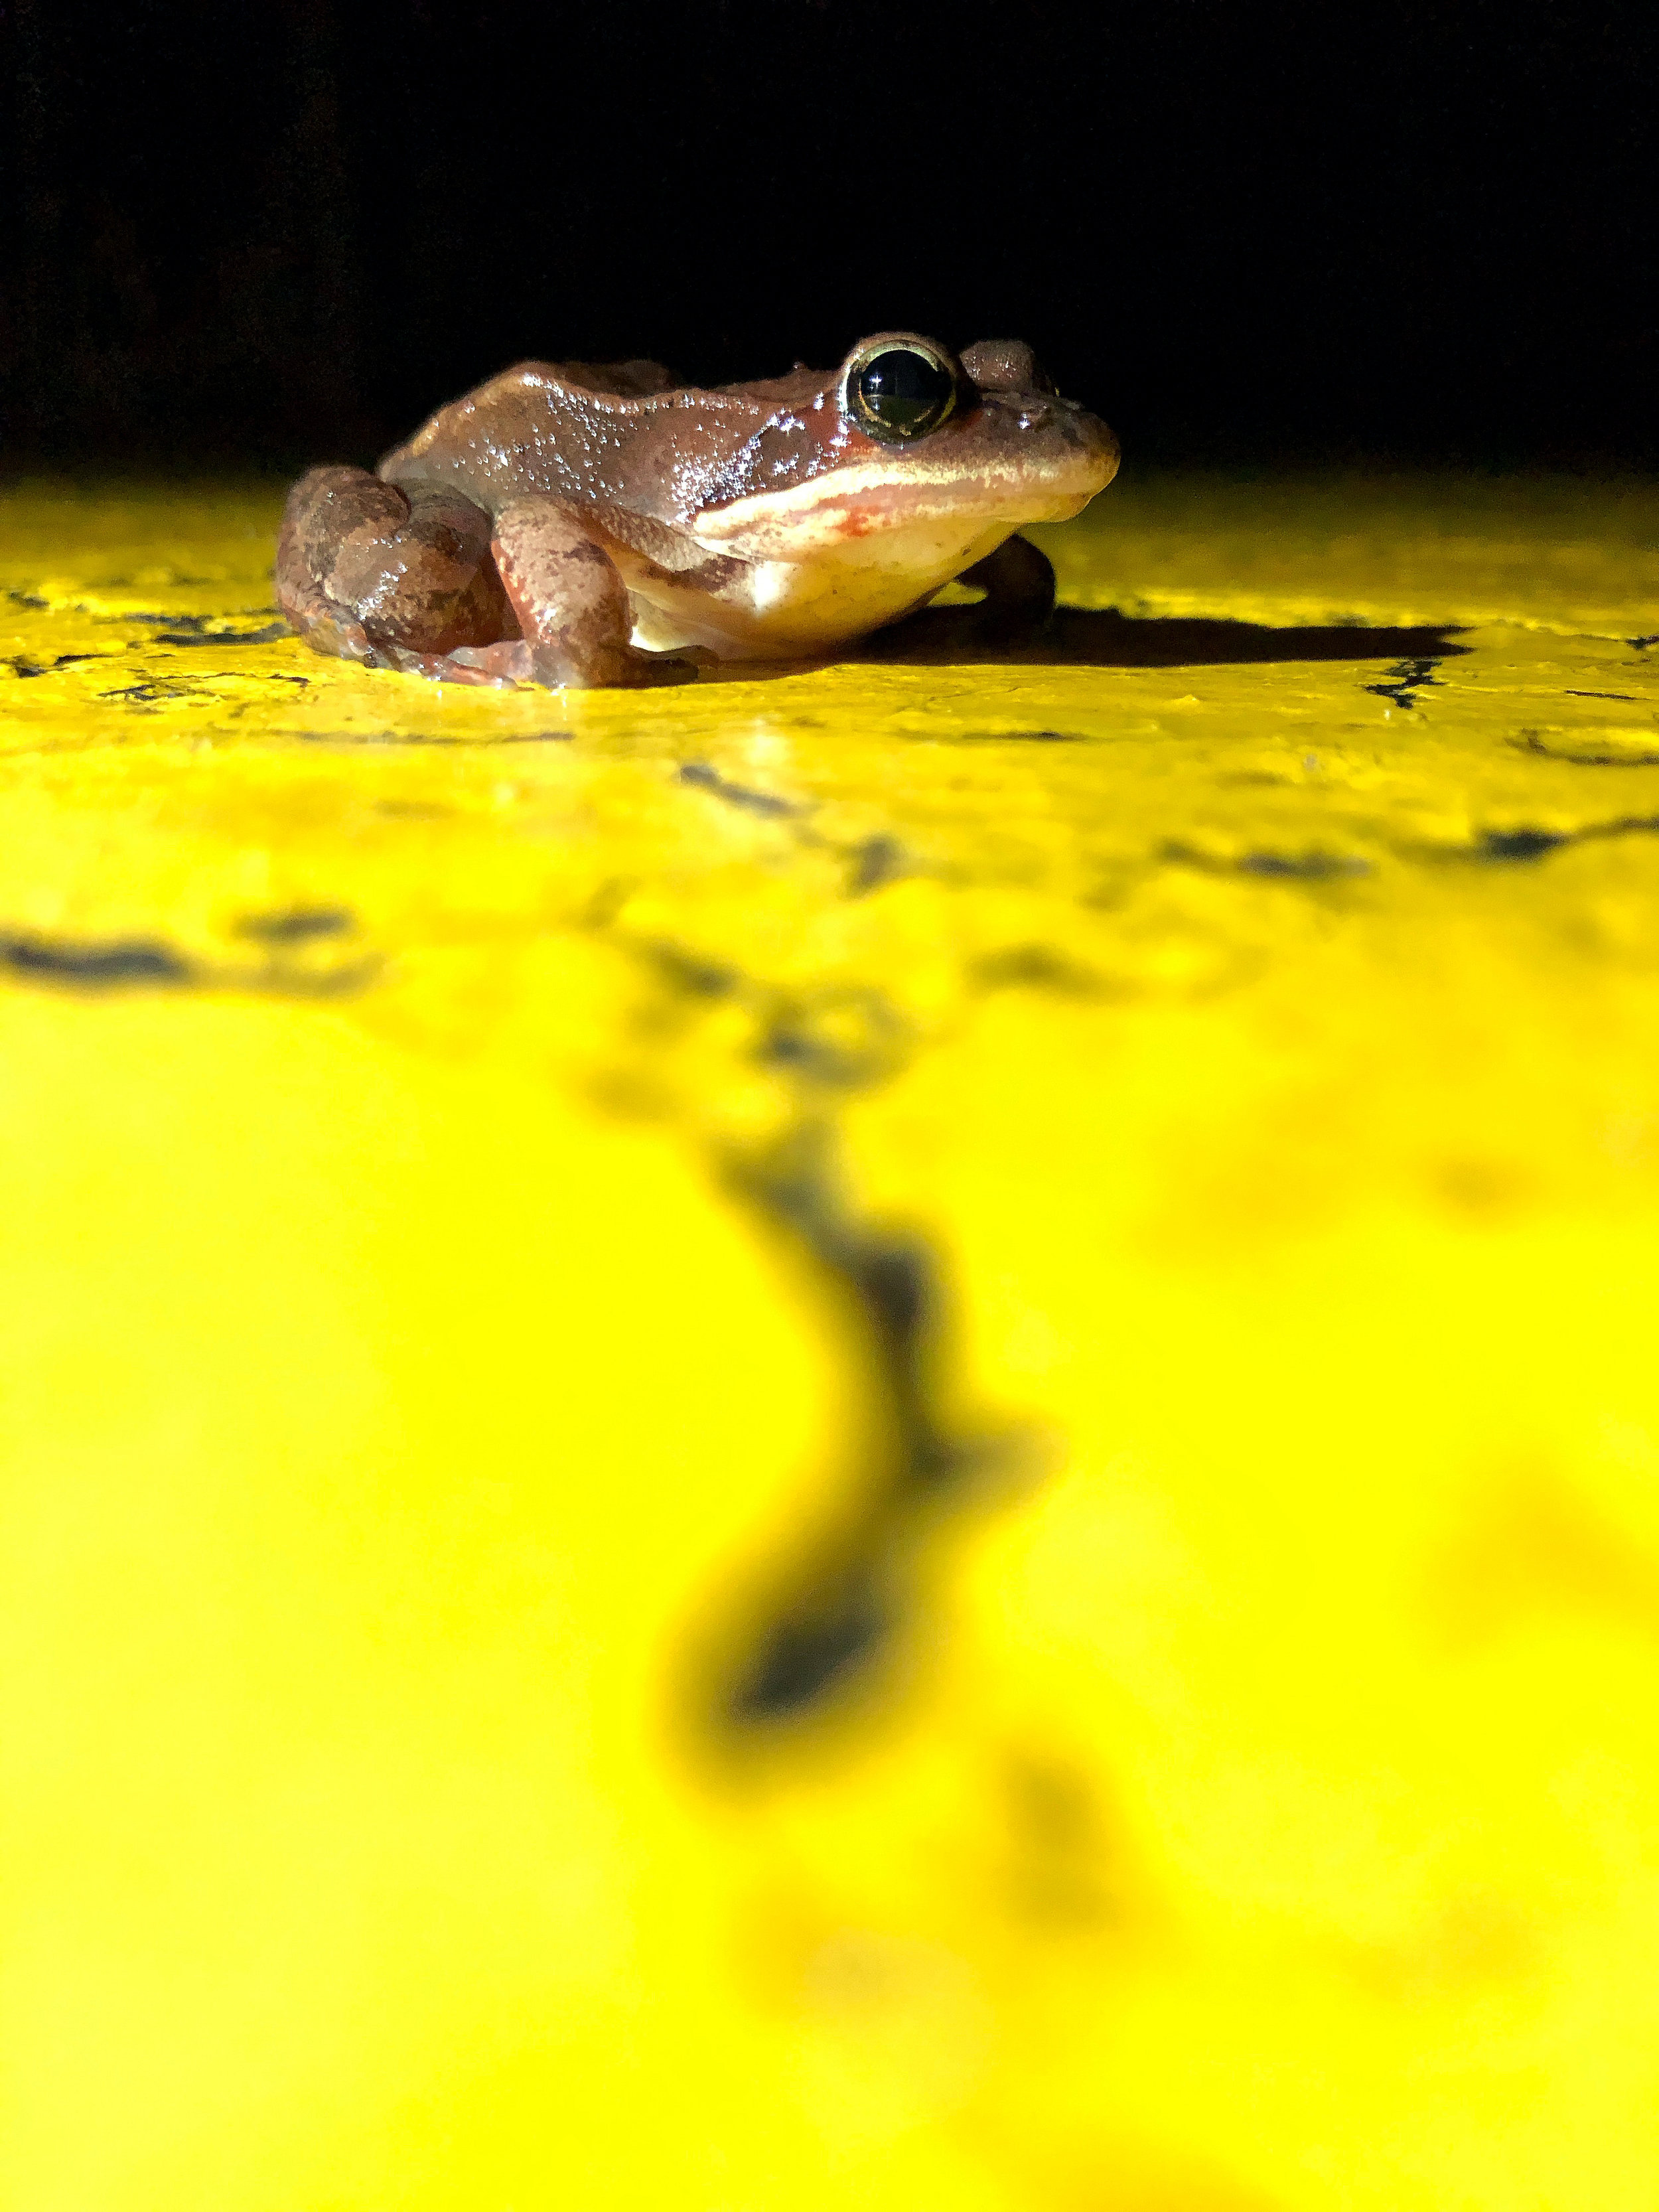  A wood frog pauses on the double yellow line before migrating back to the woods during a warm, spring night. (Anna Miller/Animalia Podcast) 